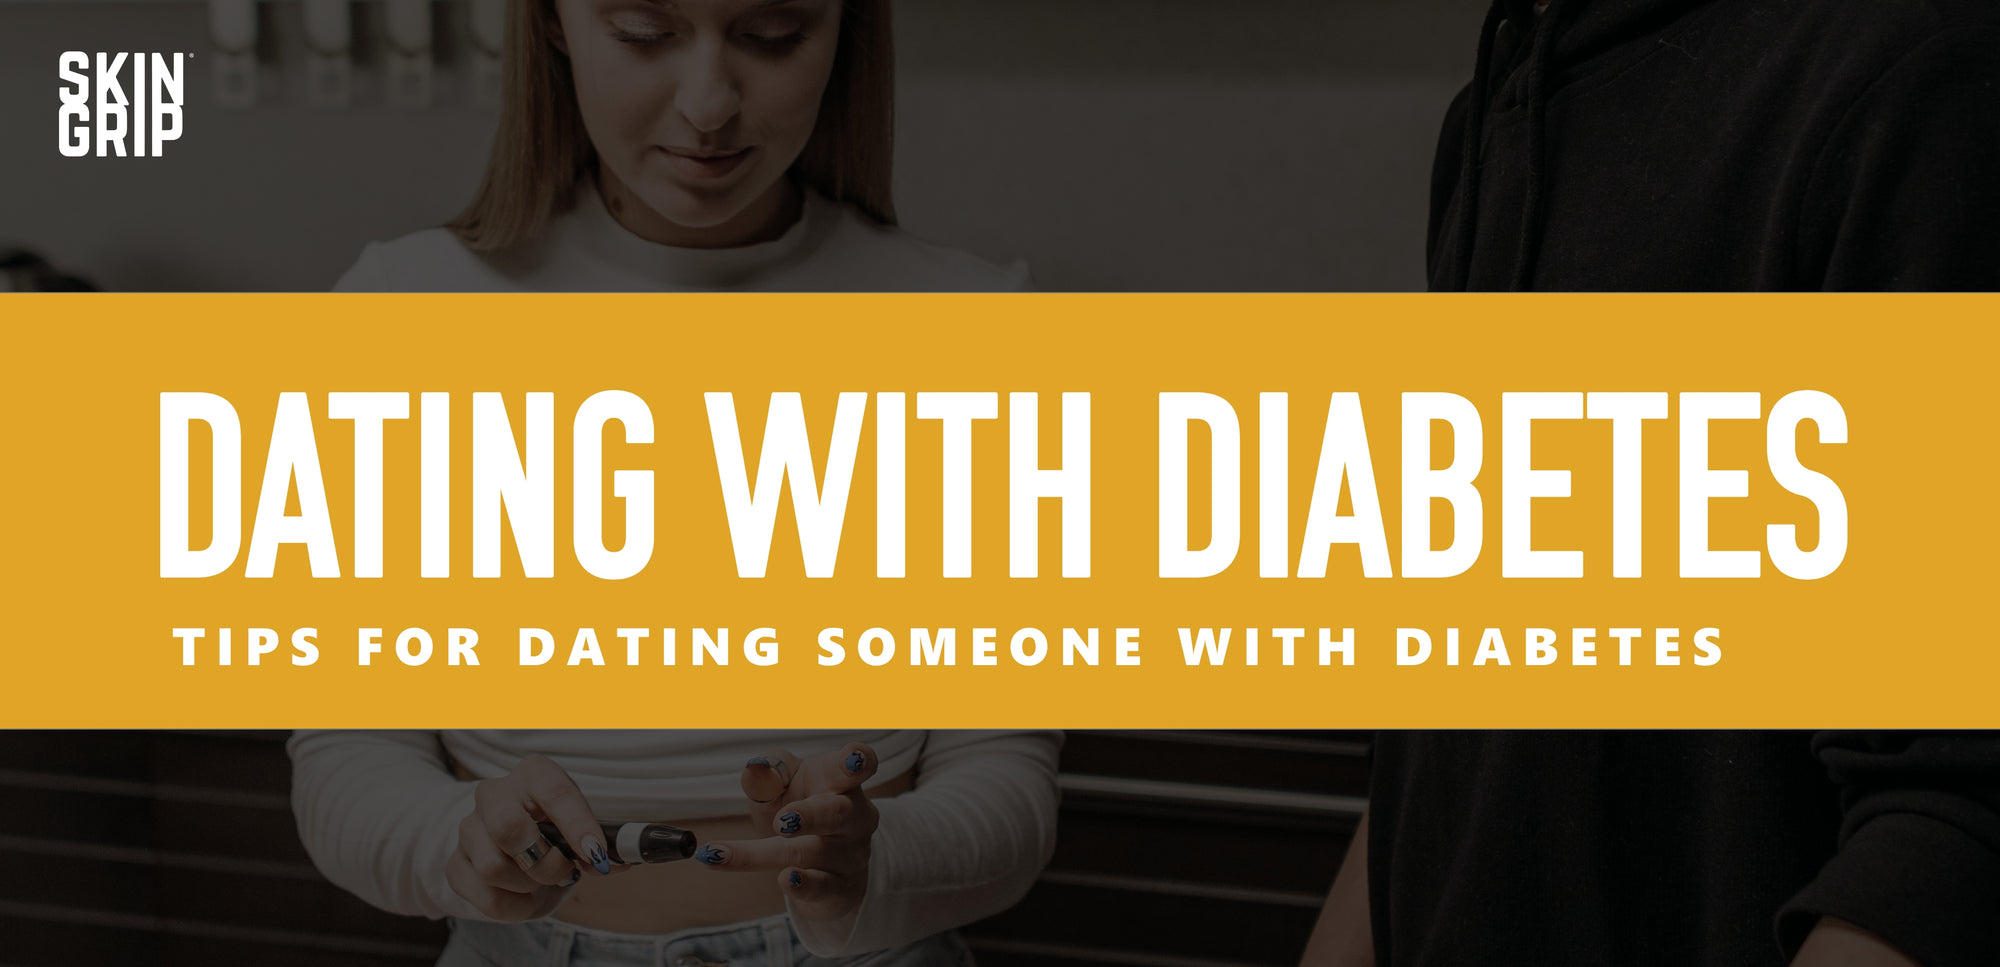 Dating with Diabetes: Tips for Dating Someone with Diabetes